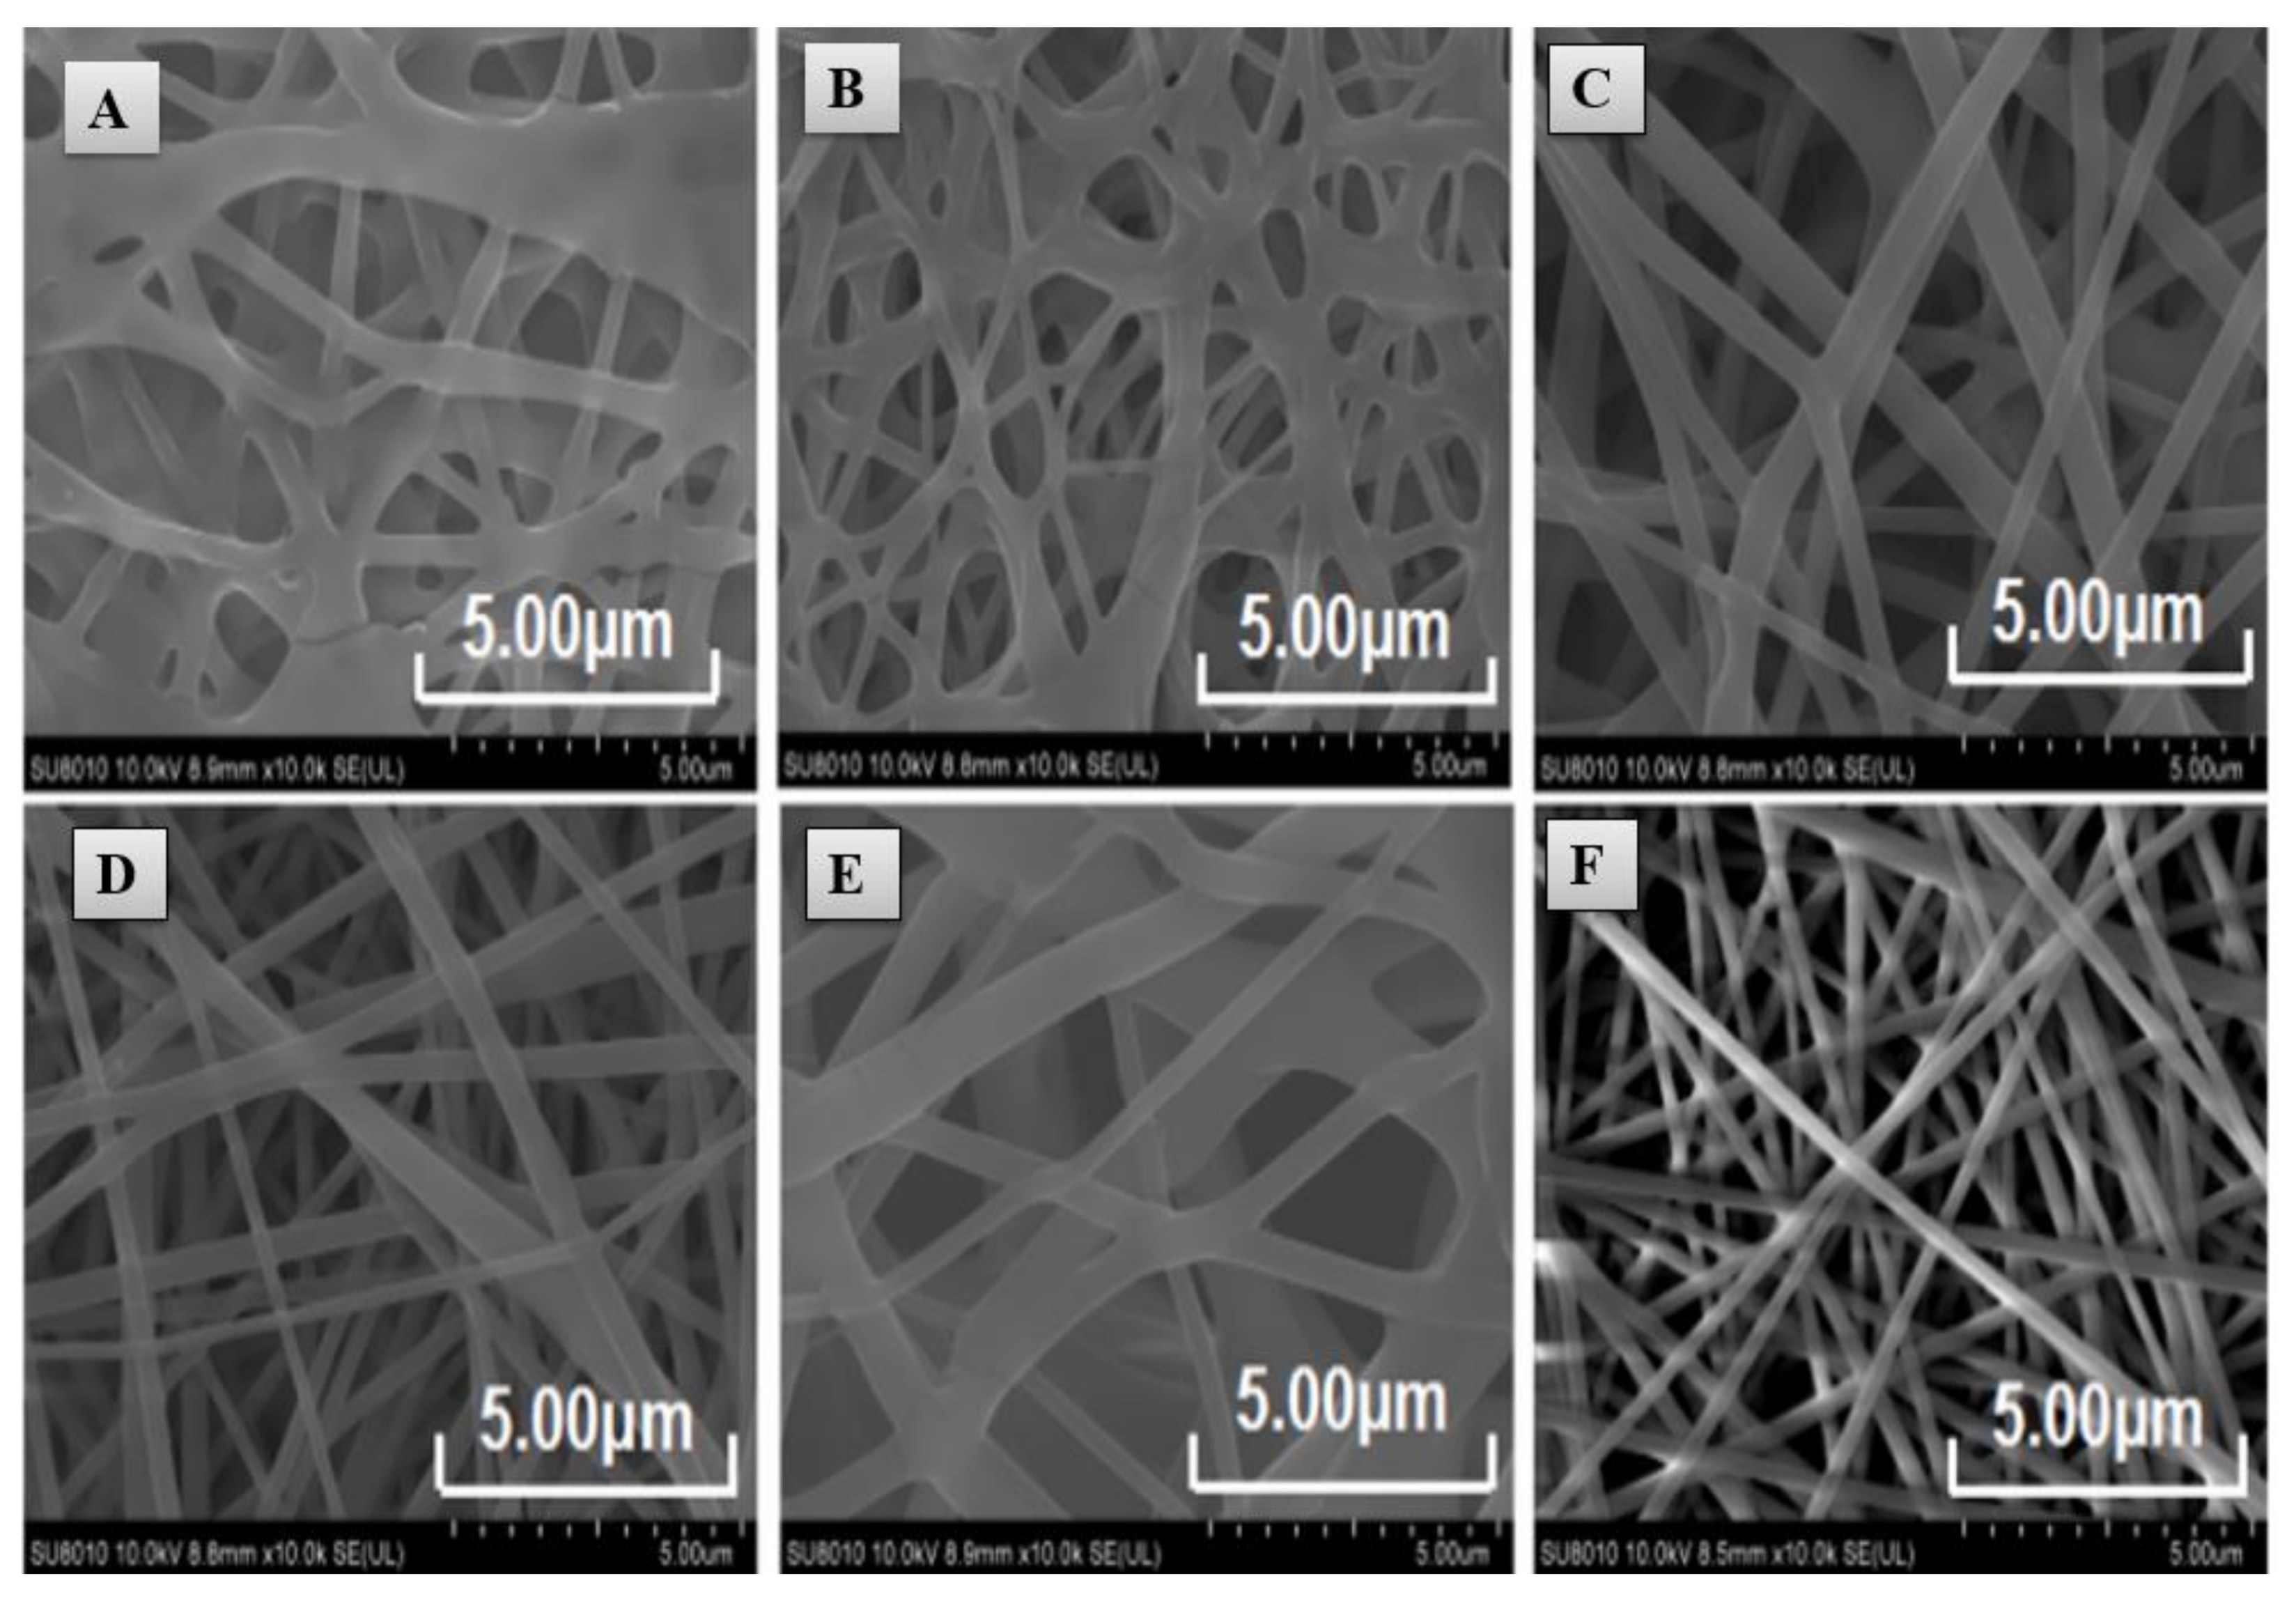 Ijms Free Full Text Prospects Of Polymeric Nanofibers Loaded With Essential Oils For Biomedical And Food Packaging Applications Html